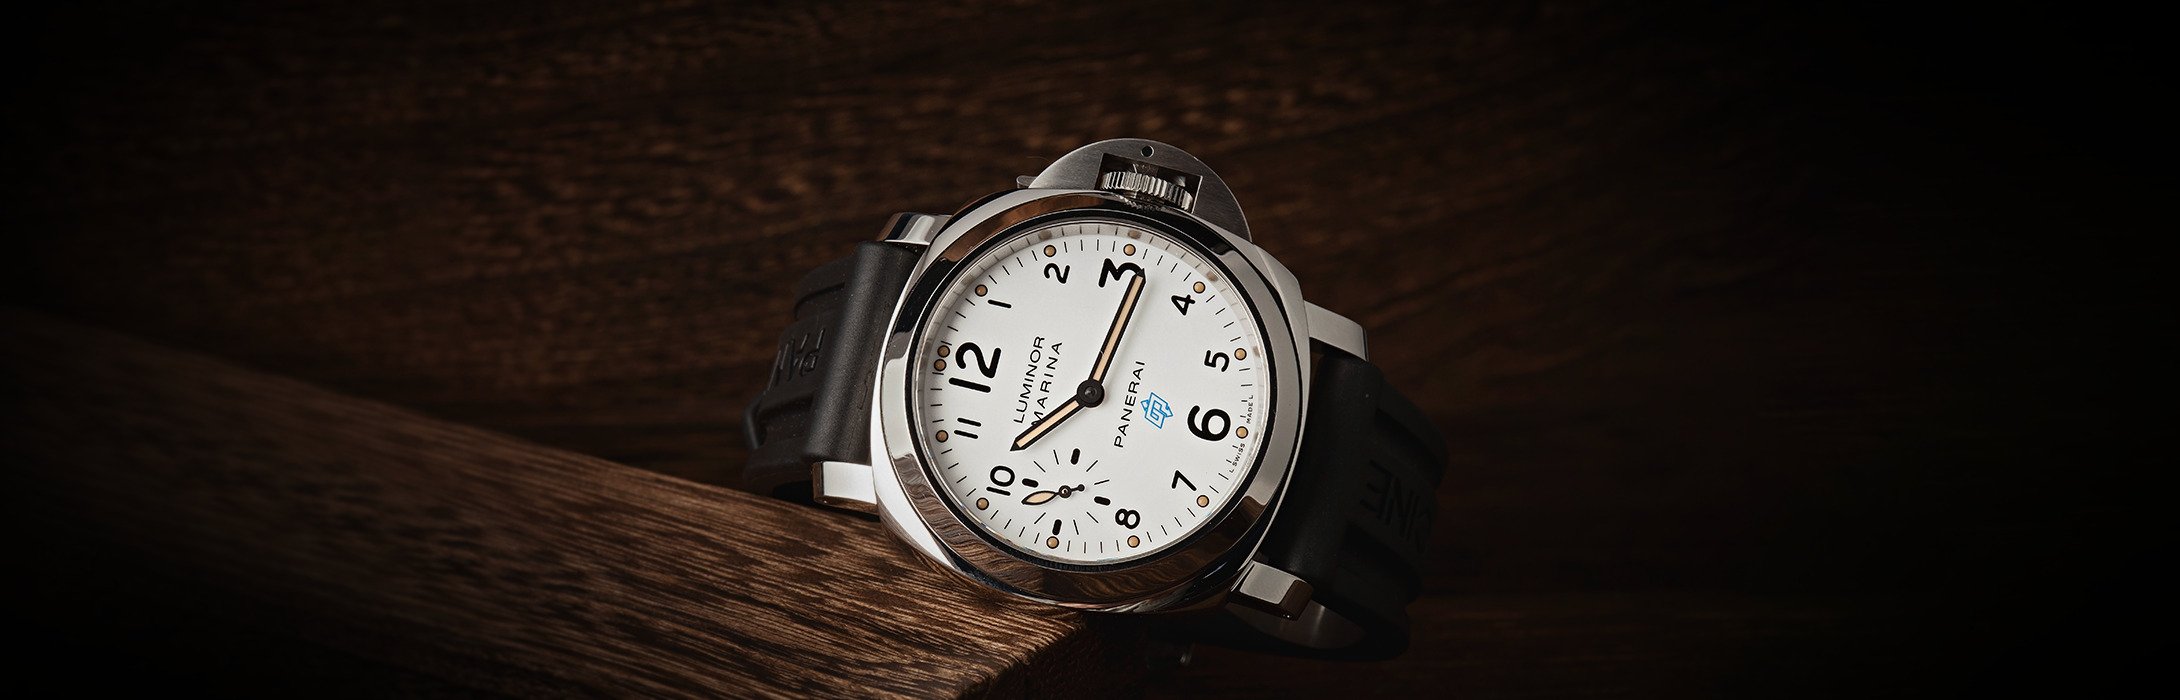 Panerai with Rubber Strap Ultimate Buying Guide